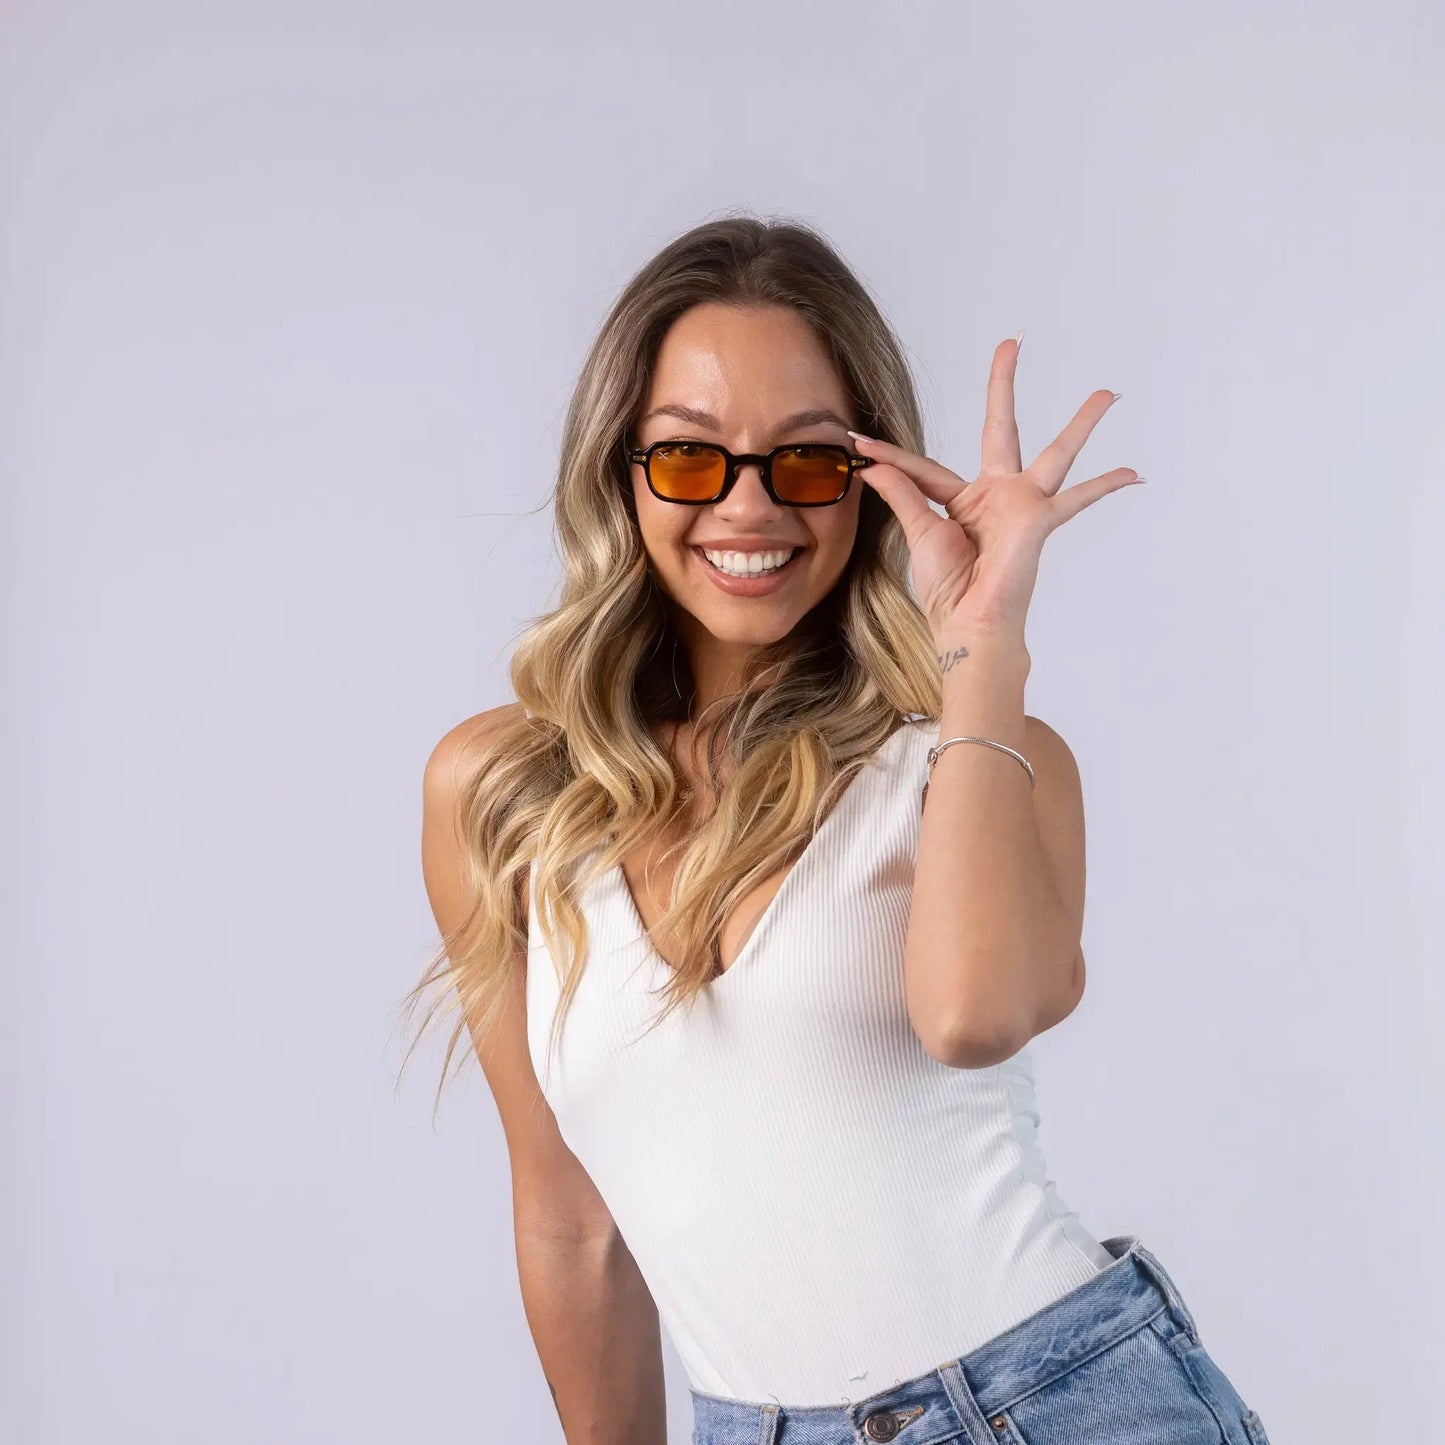 A female model wearing Exposure Sunglasses polarized sunglasses with black frames and orange lenses, posing against a white background.